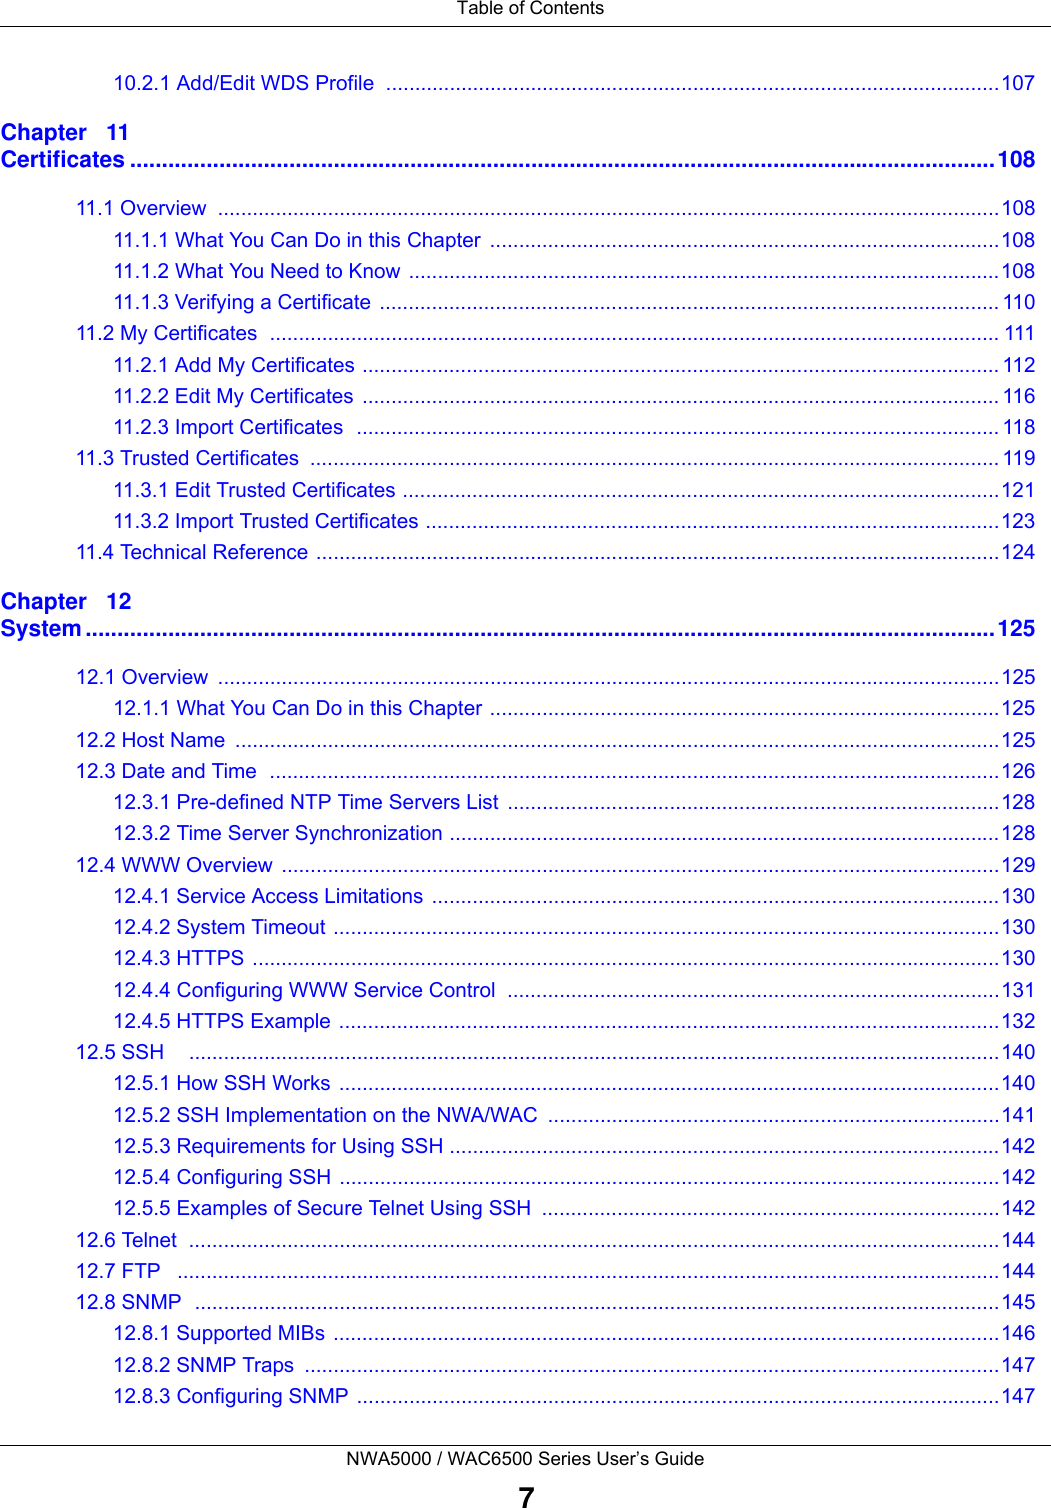  Table of ContentsNWA5000 / WAC6500 Series User’s Guide710.2.1 Add/Edit WDS Profile  ..........................................................................................................107Chapter   11Certificates ........................................................................................................................................10811.1 Overview  .......................................................................................................................................10811.1.1 What You Can Do in this Chapter  ........................................................................................10811.1.2 What You Need to Know ......................................................................................................10811.1.3 Verifying a Certificate  ........................................................................................................... 11011.2 My Certificates  .............................................................................................................................. 11111.2.1 Add My Certificates .............................................................................................................. 11211.2.2 Edit My Certificates  .............................................................................................................. 11611.2.3 Import Certificates  ............................................................................................................... 11811.3 Trusted Certificates  ....................................................................................................................... 11911.3.1 Edit Trusted Certificates .......................................................................................................12111.3.2 Import Trusted Certificates ...................................................................................................12311.4 Technical Reference ......................................................................................................................124Chapter   12System ...............................................................................................................................................12512.1 Overview  .......................................................................................................................................12512.1.1 What You Can Do in this Chapter ........................................................................................12512.2 Host Name  ....................................................................................................................................12512.3 Date and Time  ..............................................................................................................................12612.3.1 Pre-defined NTP Time Servers List  .....................................................................................12812.3.2 Time Server Synchronization ...............................................................................................12812.4 WWW Overview ............................................................................................................................12912.4.1 Service Access Limitations  ..................................................................................................13012.4.2 System Timeout ...................................................................................................................13012.4.3 HTTPS .................................................................................................................................13012.4.4 Configuring WWW Service Control .....................................................................................13112.4.5 HTTPS Example ..................................................................................................................13212.5 SSH    ............................................................................................................................................14012.5.1 How SSH Works ..................................................................................................................14012.5.2 SSH Implementation on the NWA/WAC  ..............................................................................14112.5.3 Requirements for Using SSH ...............................................................................................14212.5.4 Configuring SSH ..................................................................................................................14212.5.5 Examples of Secure Telnet Using SSH  ...............................................................................14212.6 Telnet  ............................................................................................................................................14412.7 FTP   ..............................................................................................................................................14412.8 SNMP  ...........................................................................................................................................14512.8.1 Supported MIBs ...................................................................................................................14612.8.2 SNMP Traps  ........................................................................................................................14712.8.3 Configuring SNMP ...............................................................................................................147